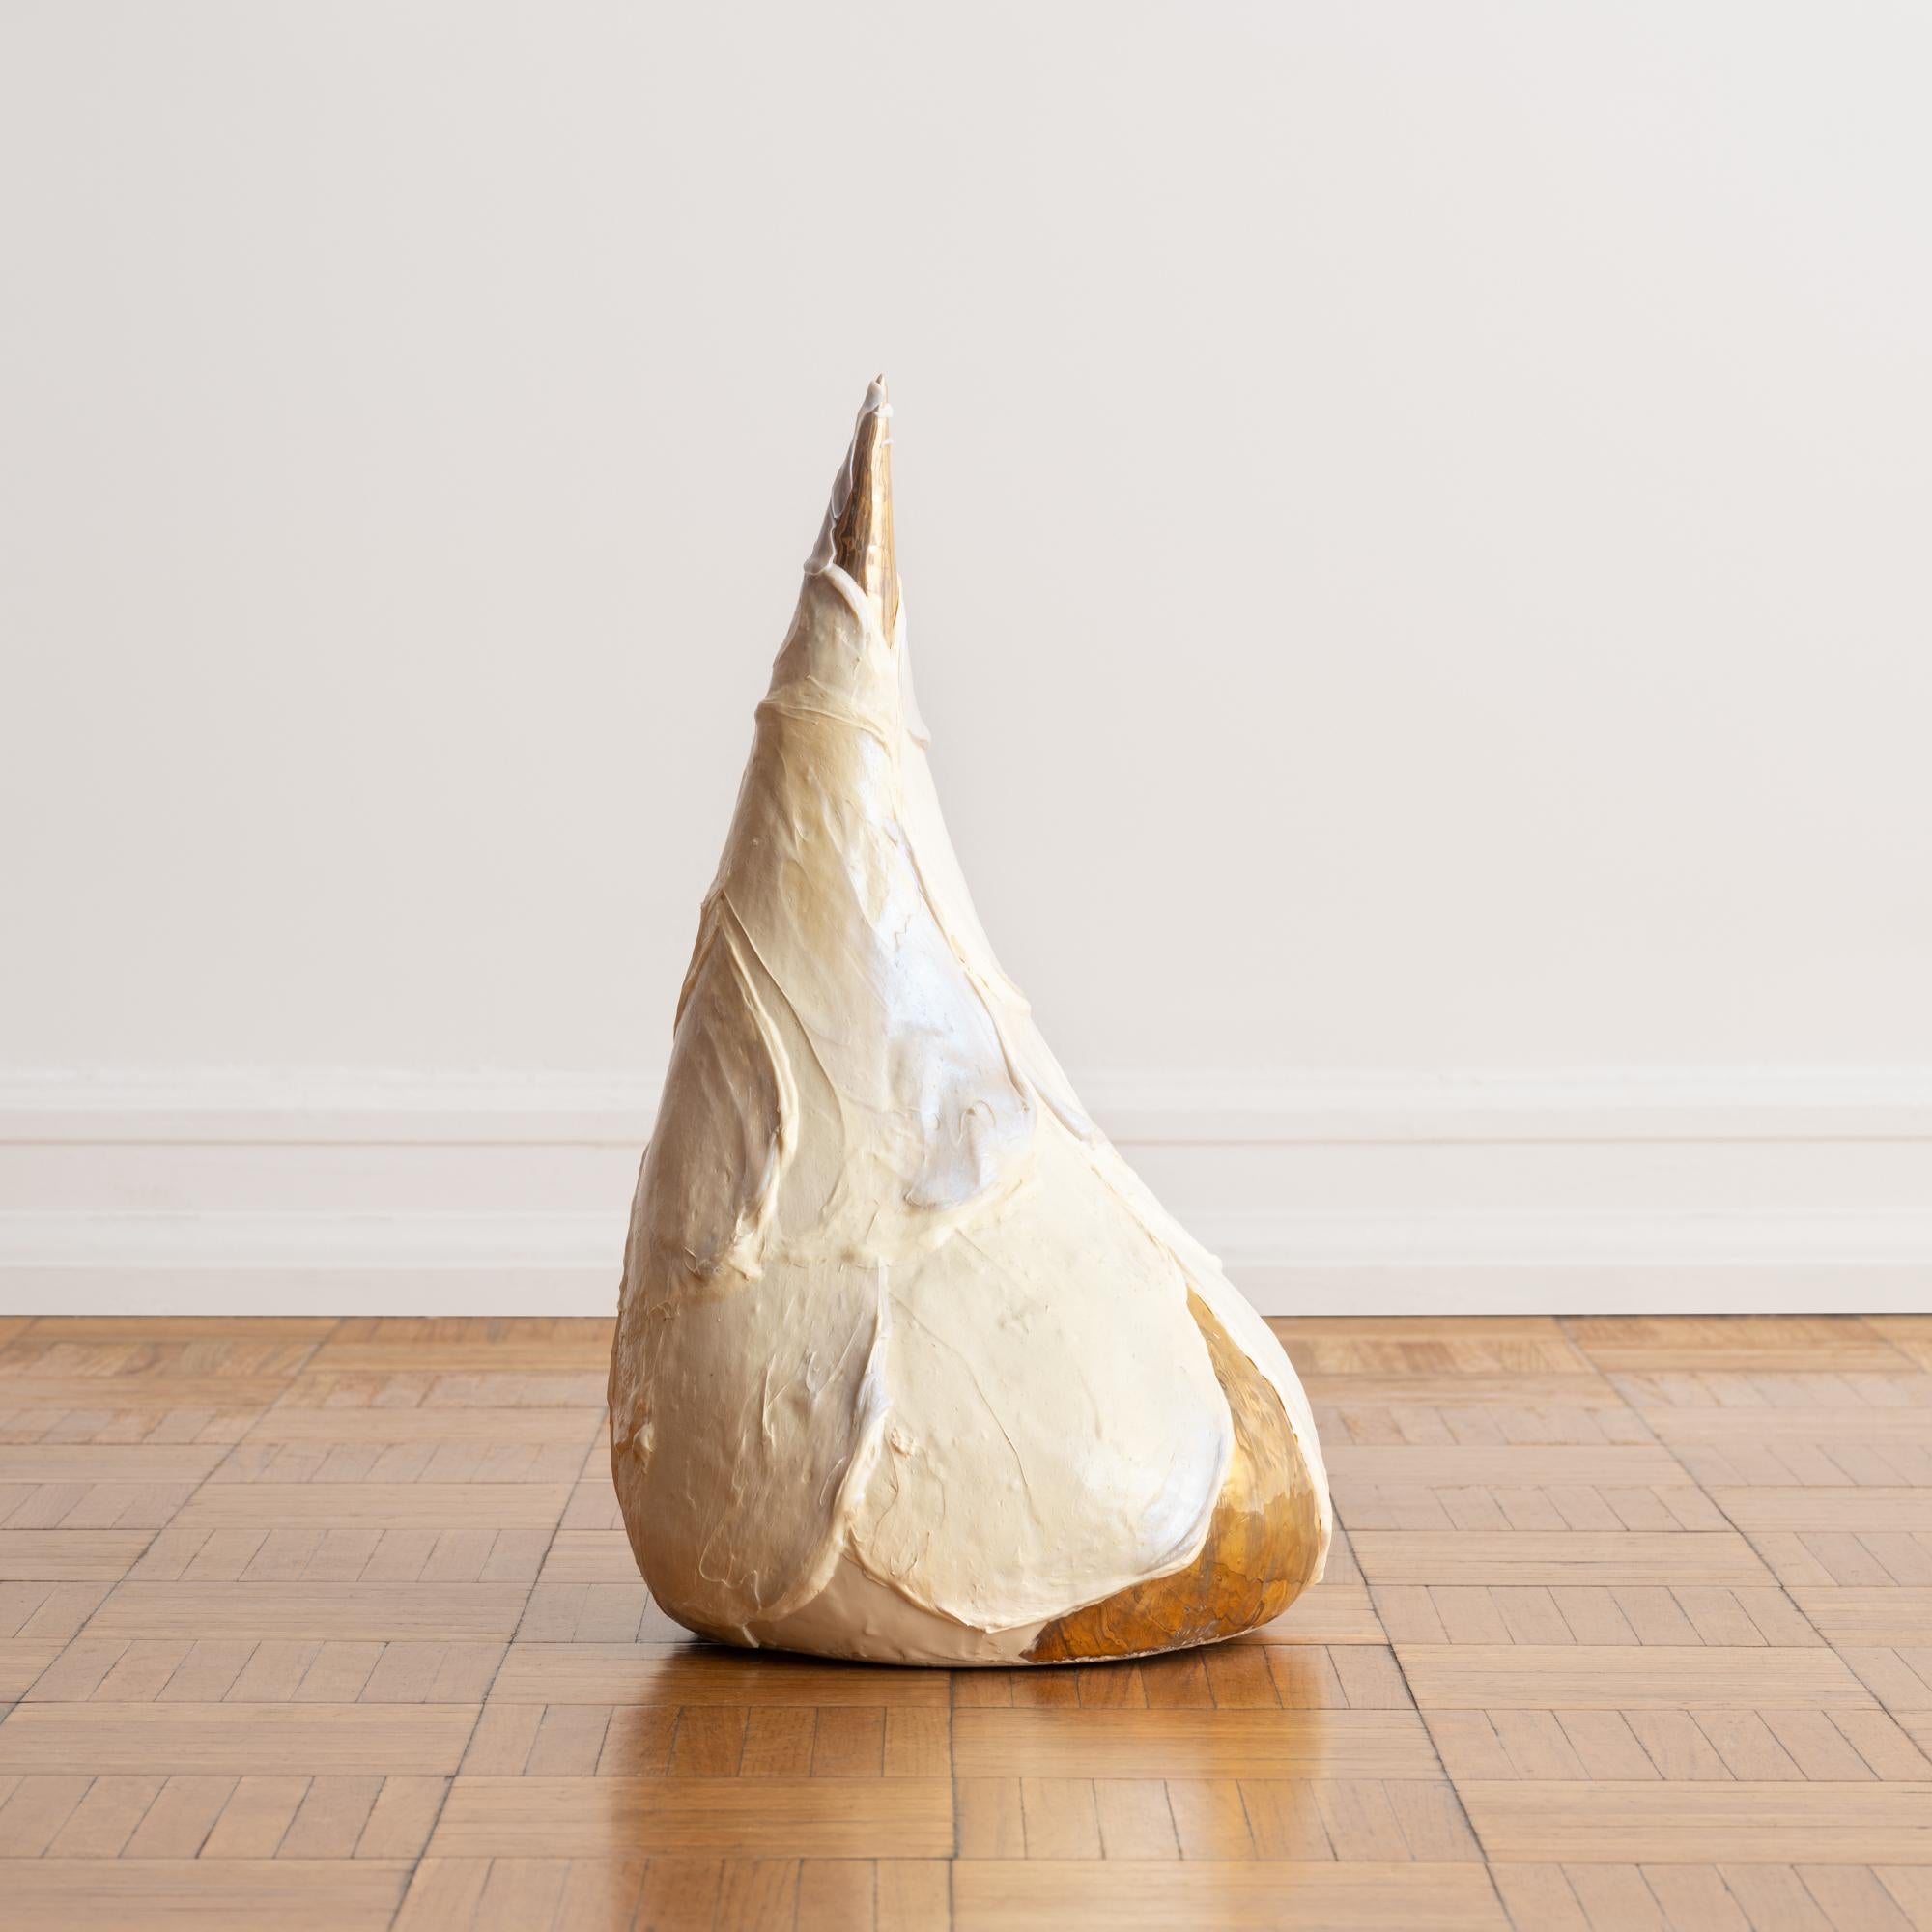 'Untitled (High)', by Ivana Brenner, is a unique, contemporary ceramic sculpture that can be placed on the floor, or any reliable surface. It can be paired with 'Untitled (Low)' for a dynamic feel, or as a standalone work that blurs the line between